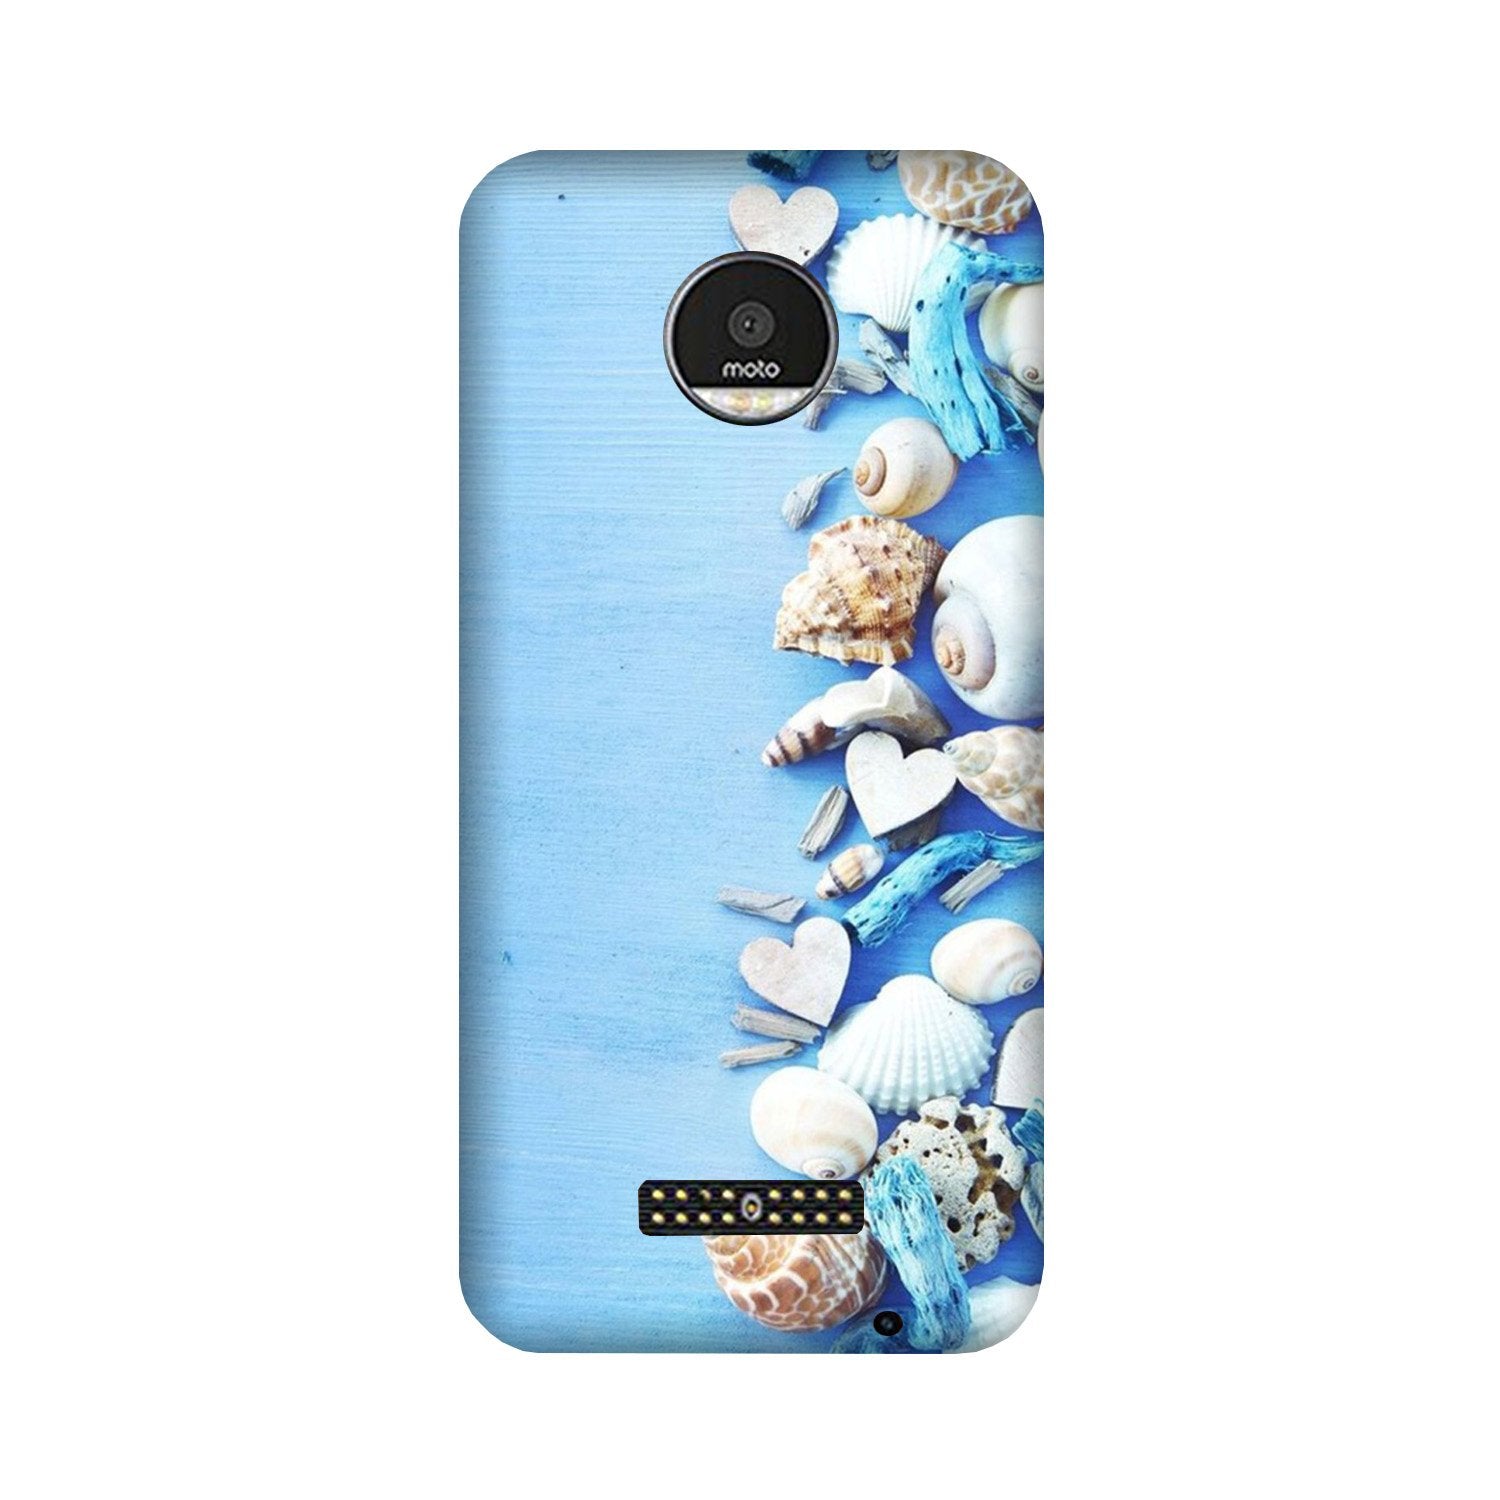 Sea Shells2 Case for Moto Z Play